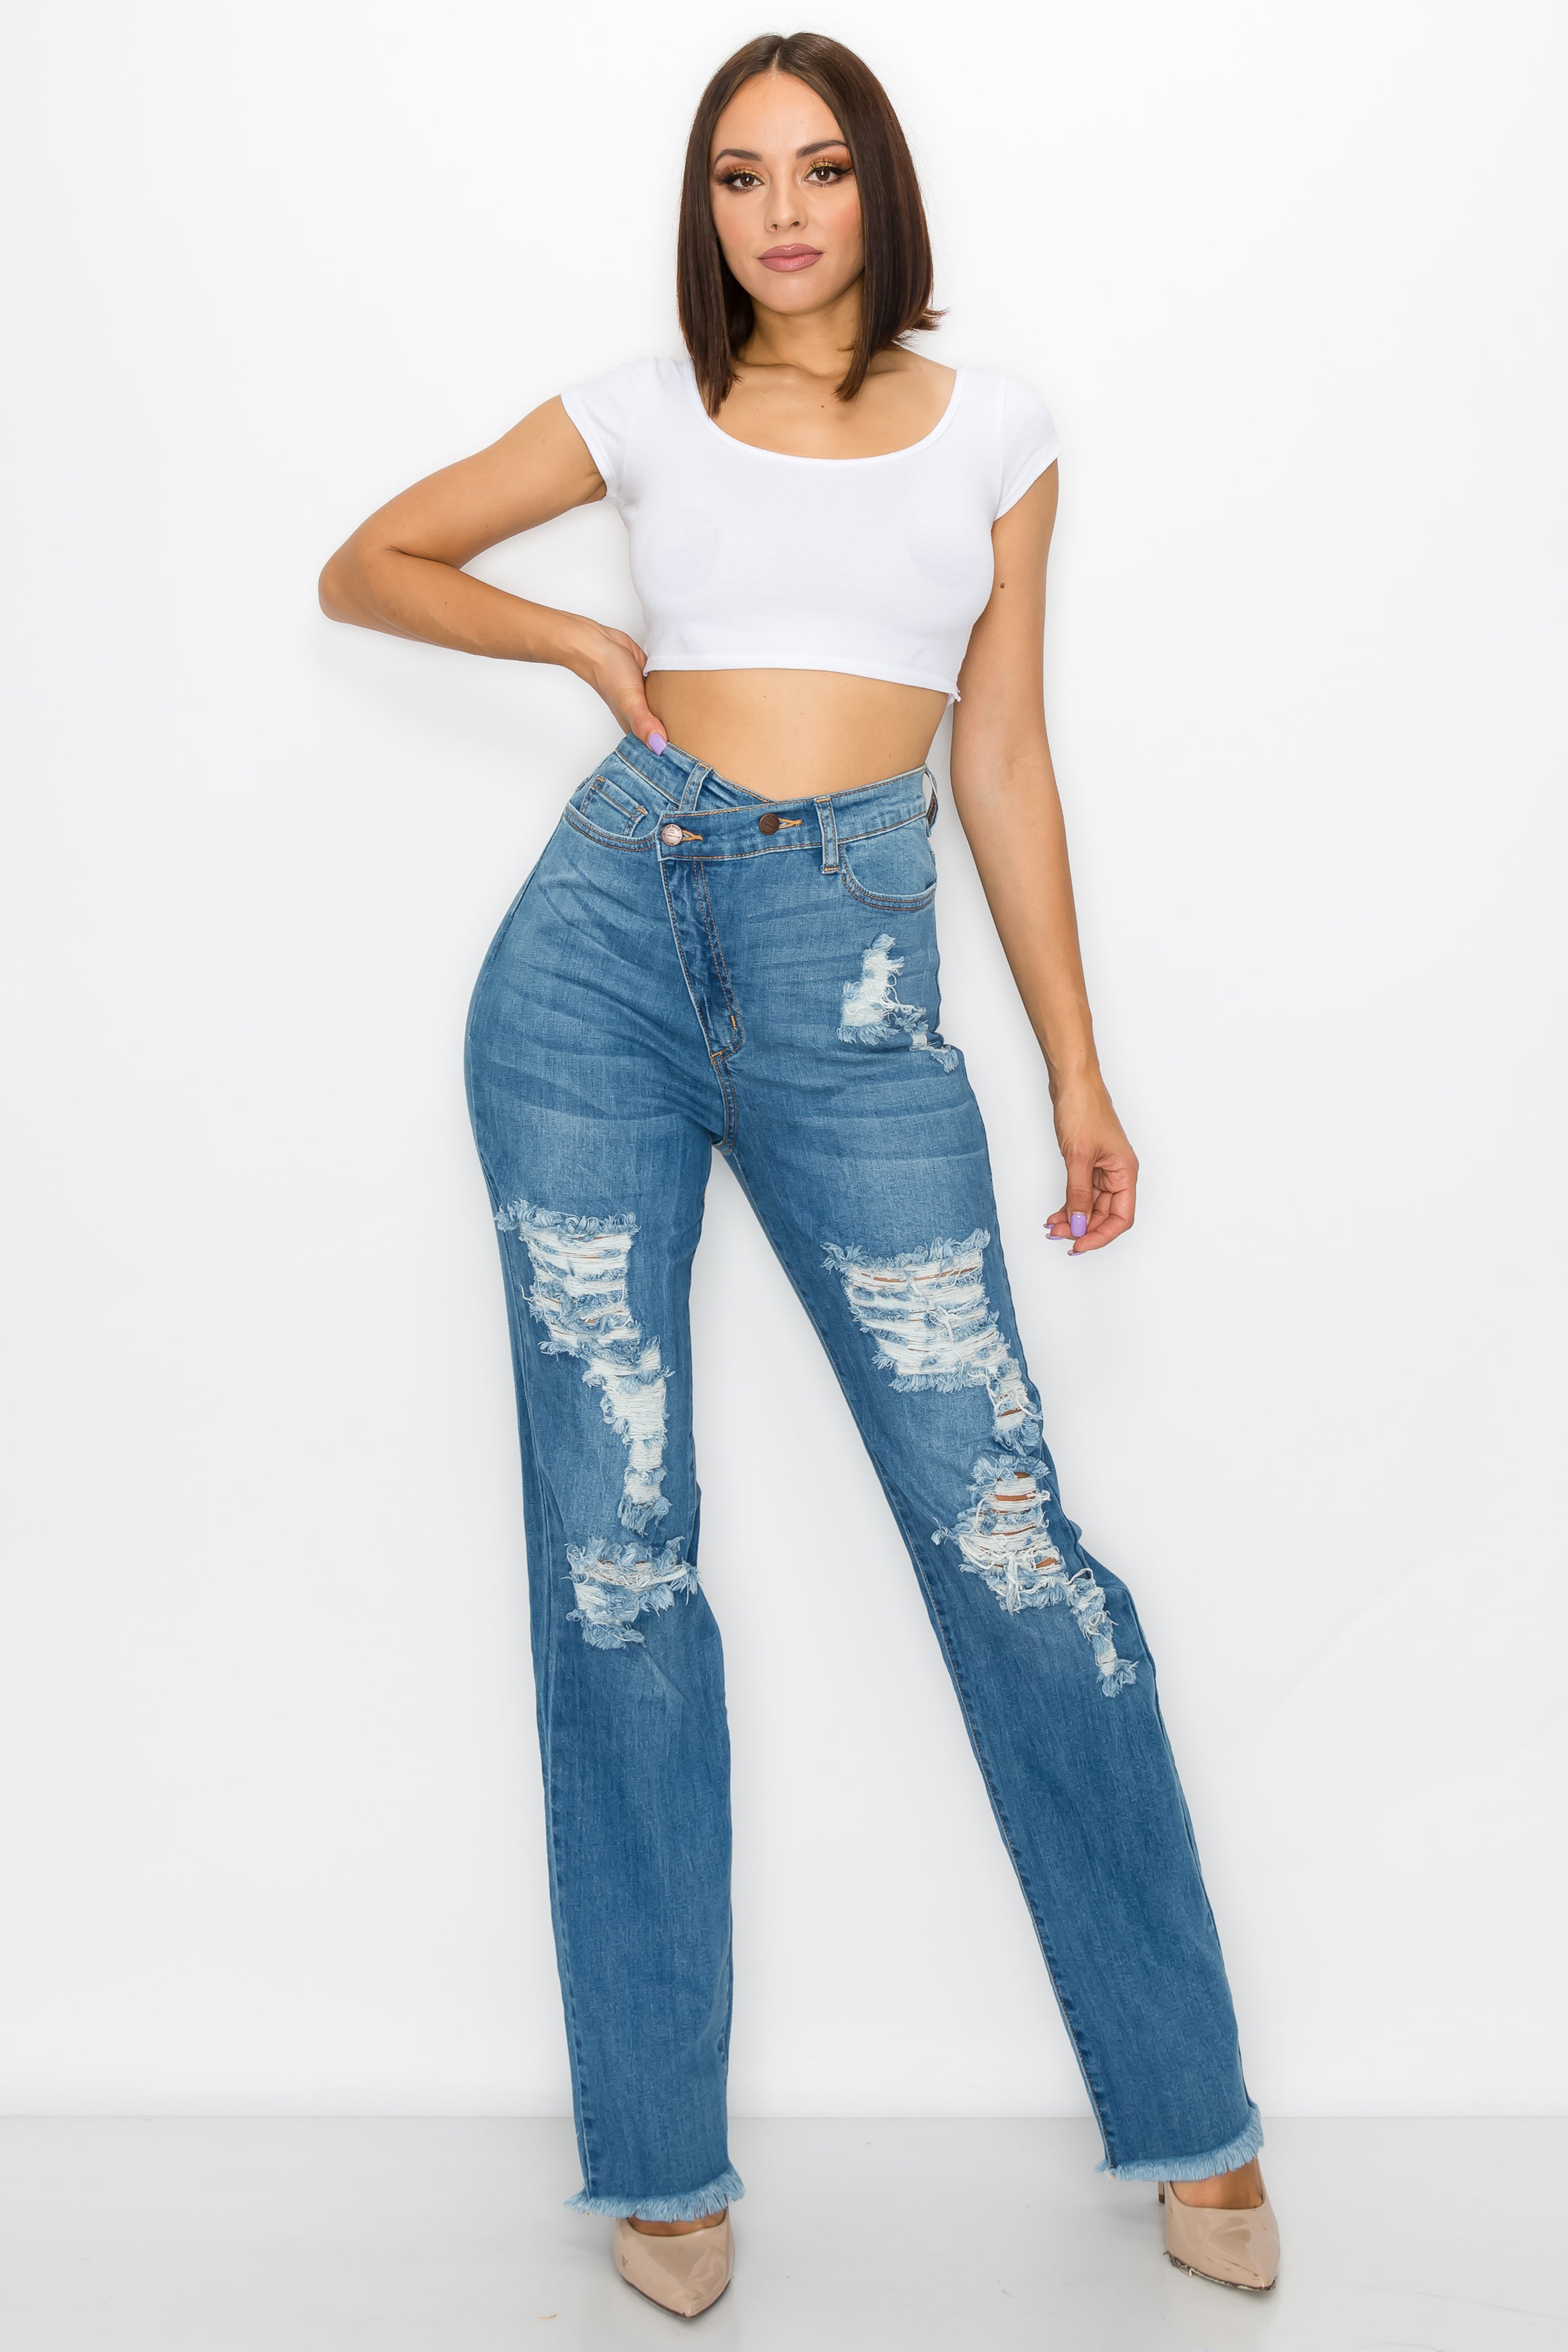 4898 Women's Crossover High Waisted Destressed Loose fit Jeans